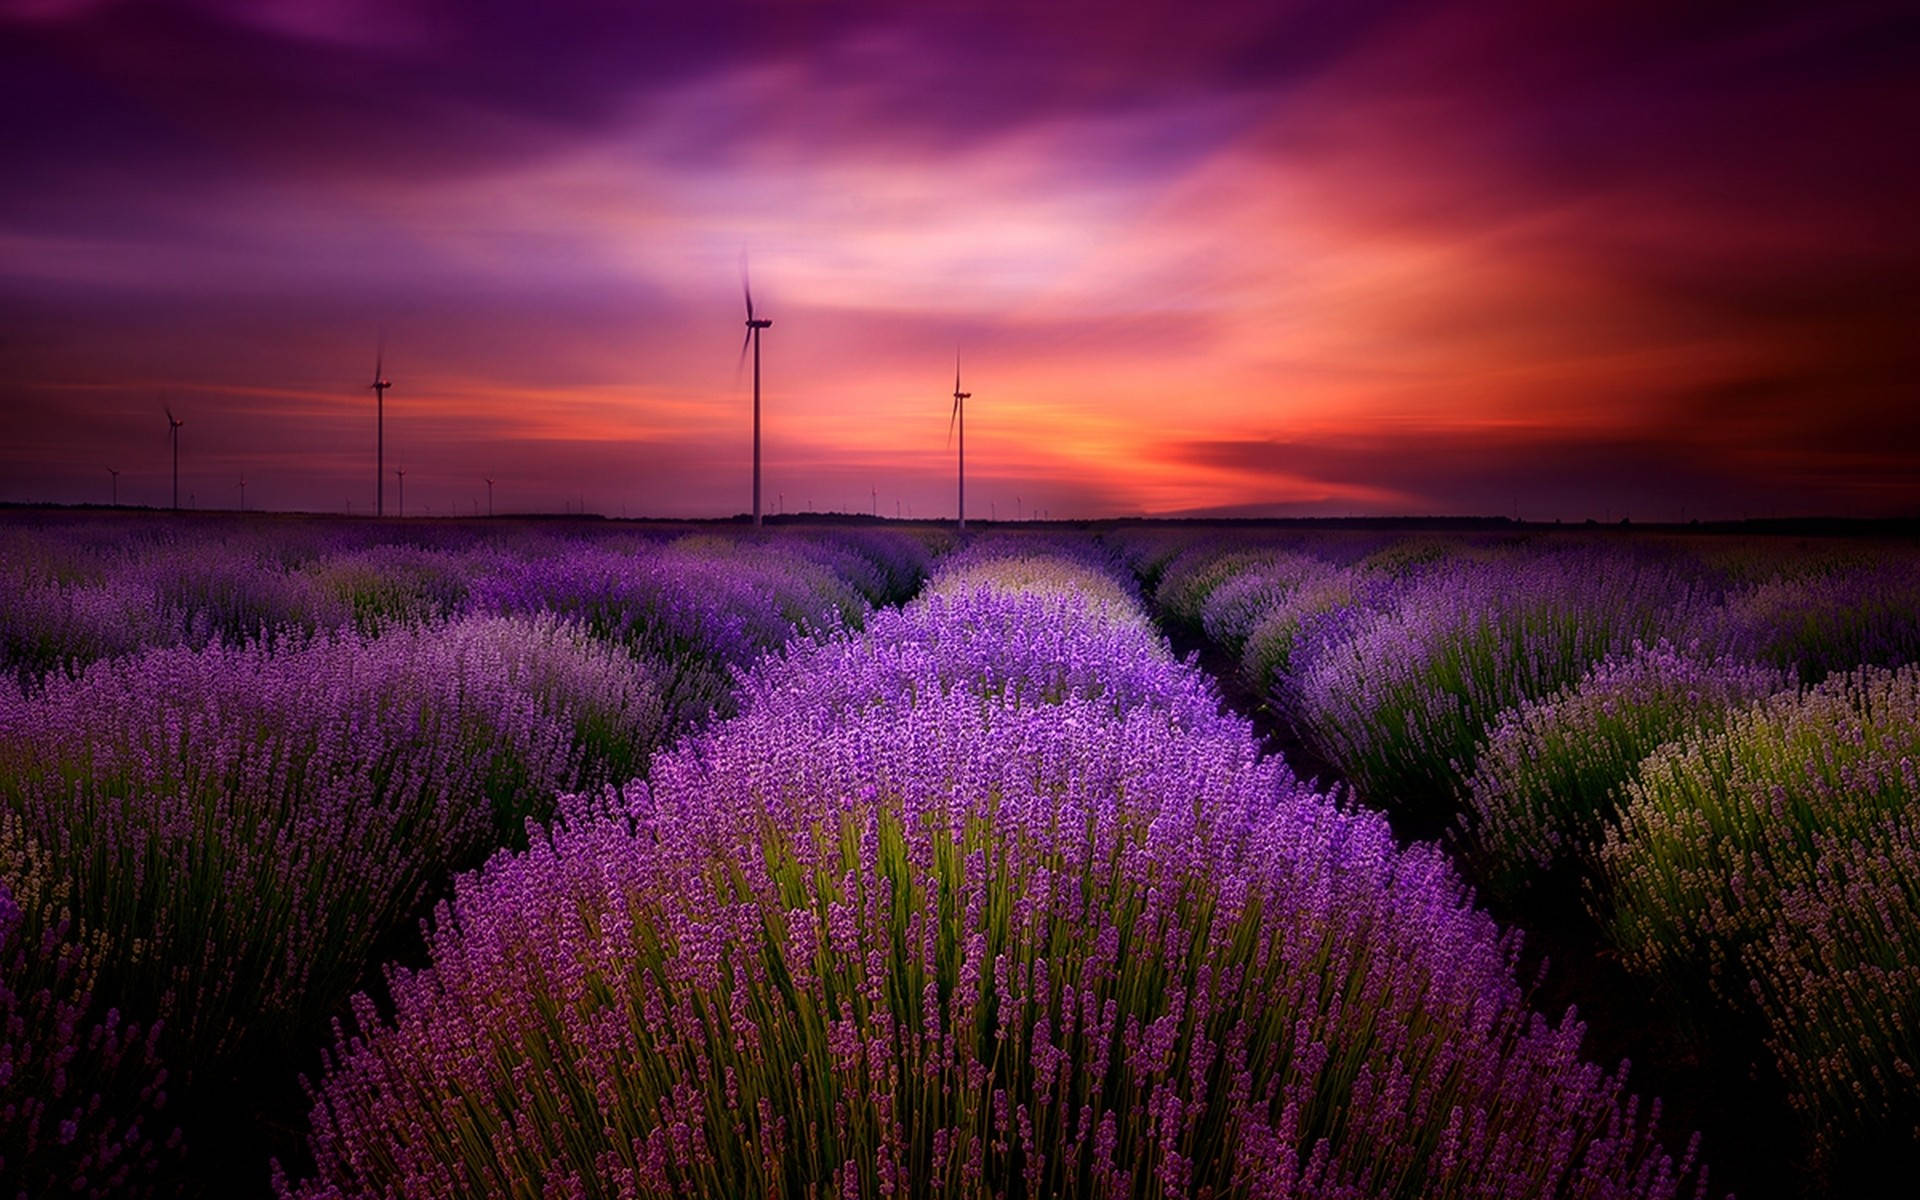 Lavender Aesthetic Field And Windmills Background